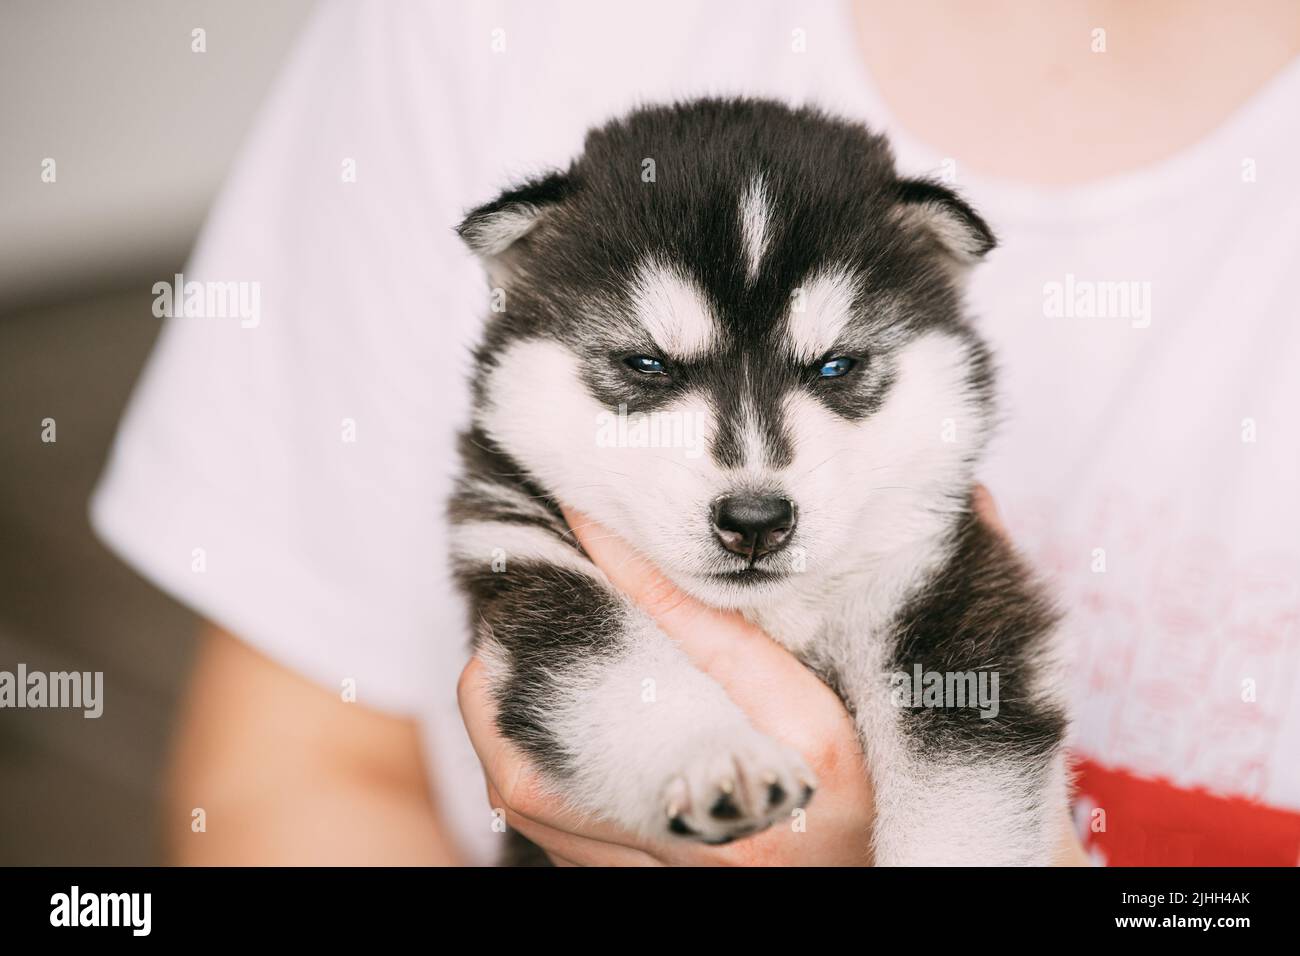 Four-week-old Husky Puppy Of White-gray-black Color Close Up Portrait Stock Photo